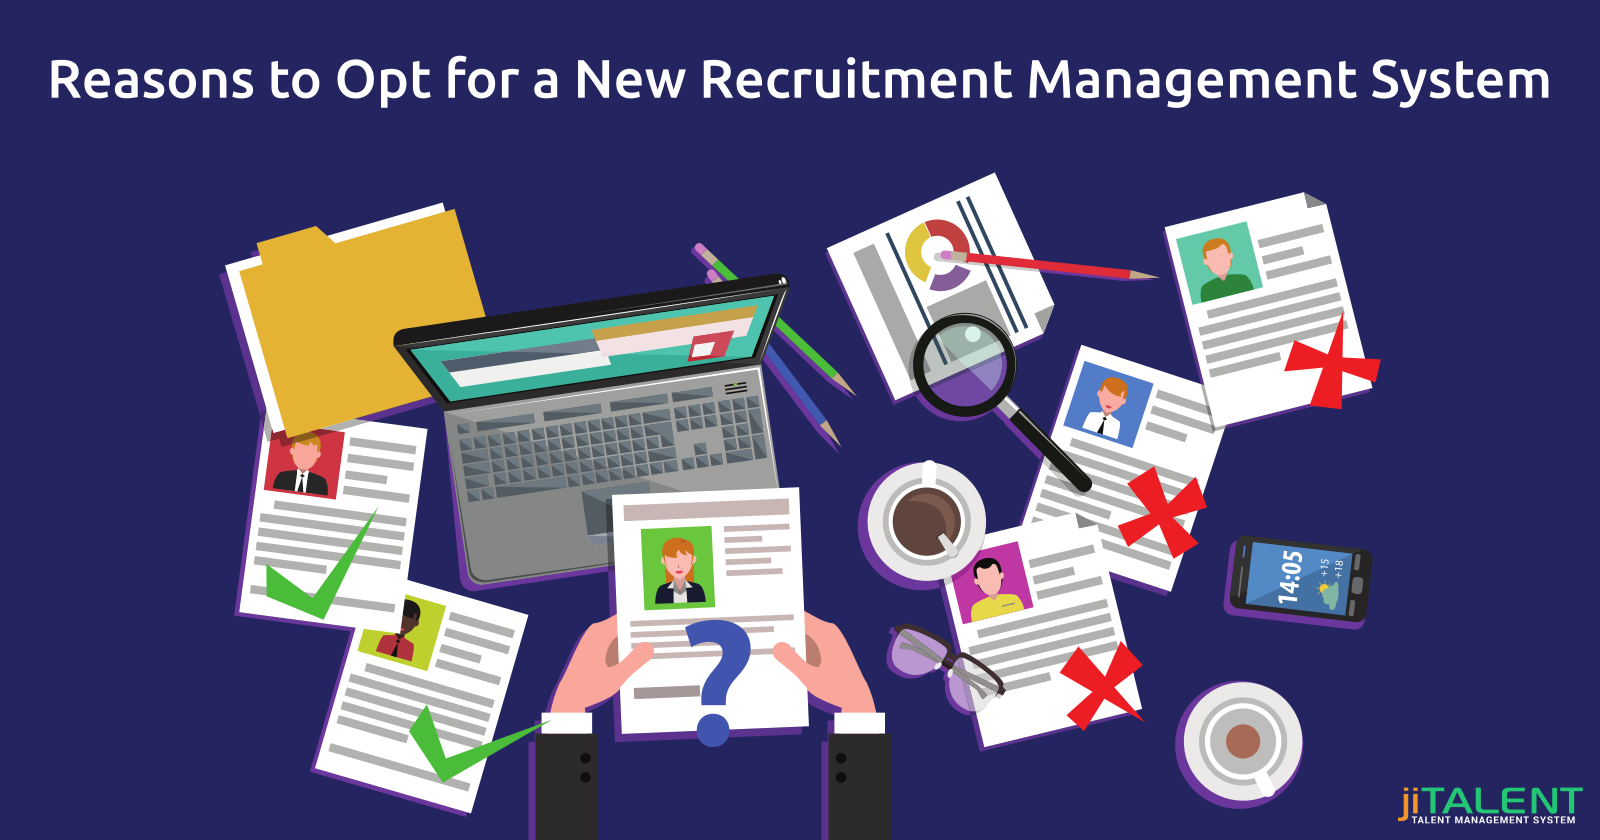 Reasons to Opt for a New Recruitment Management System